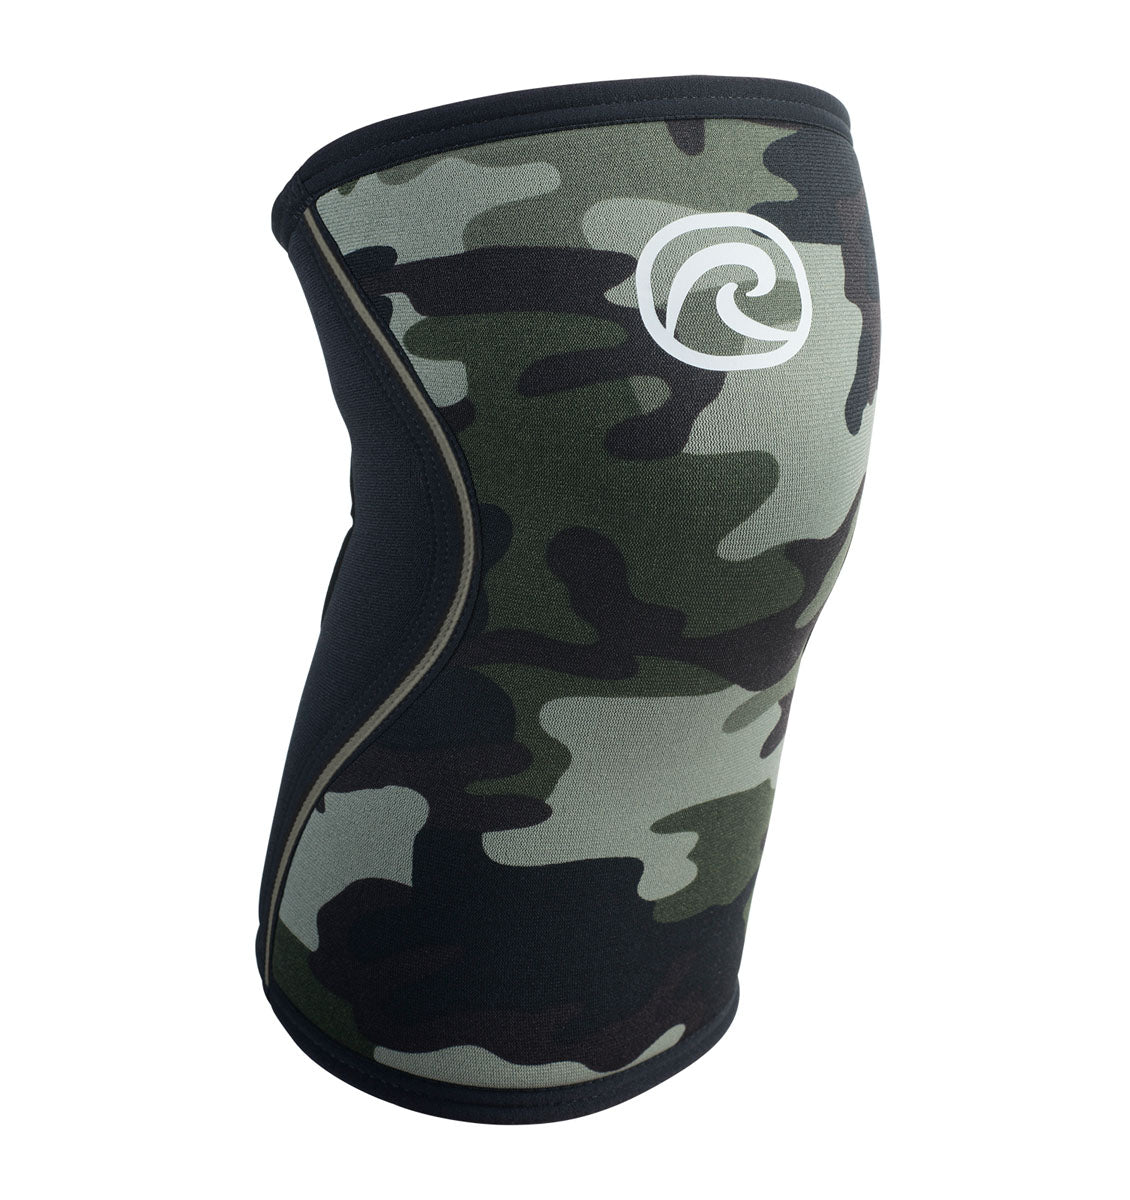 105417 - Rehband Rx Knee Sleeve - Camo - 7mm - Front